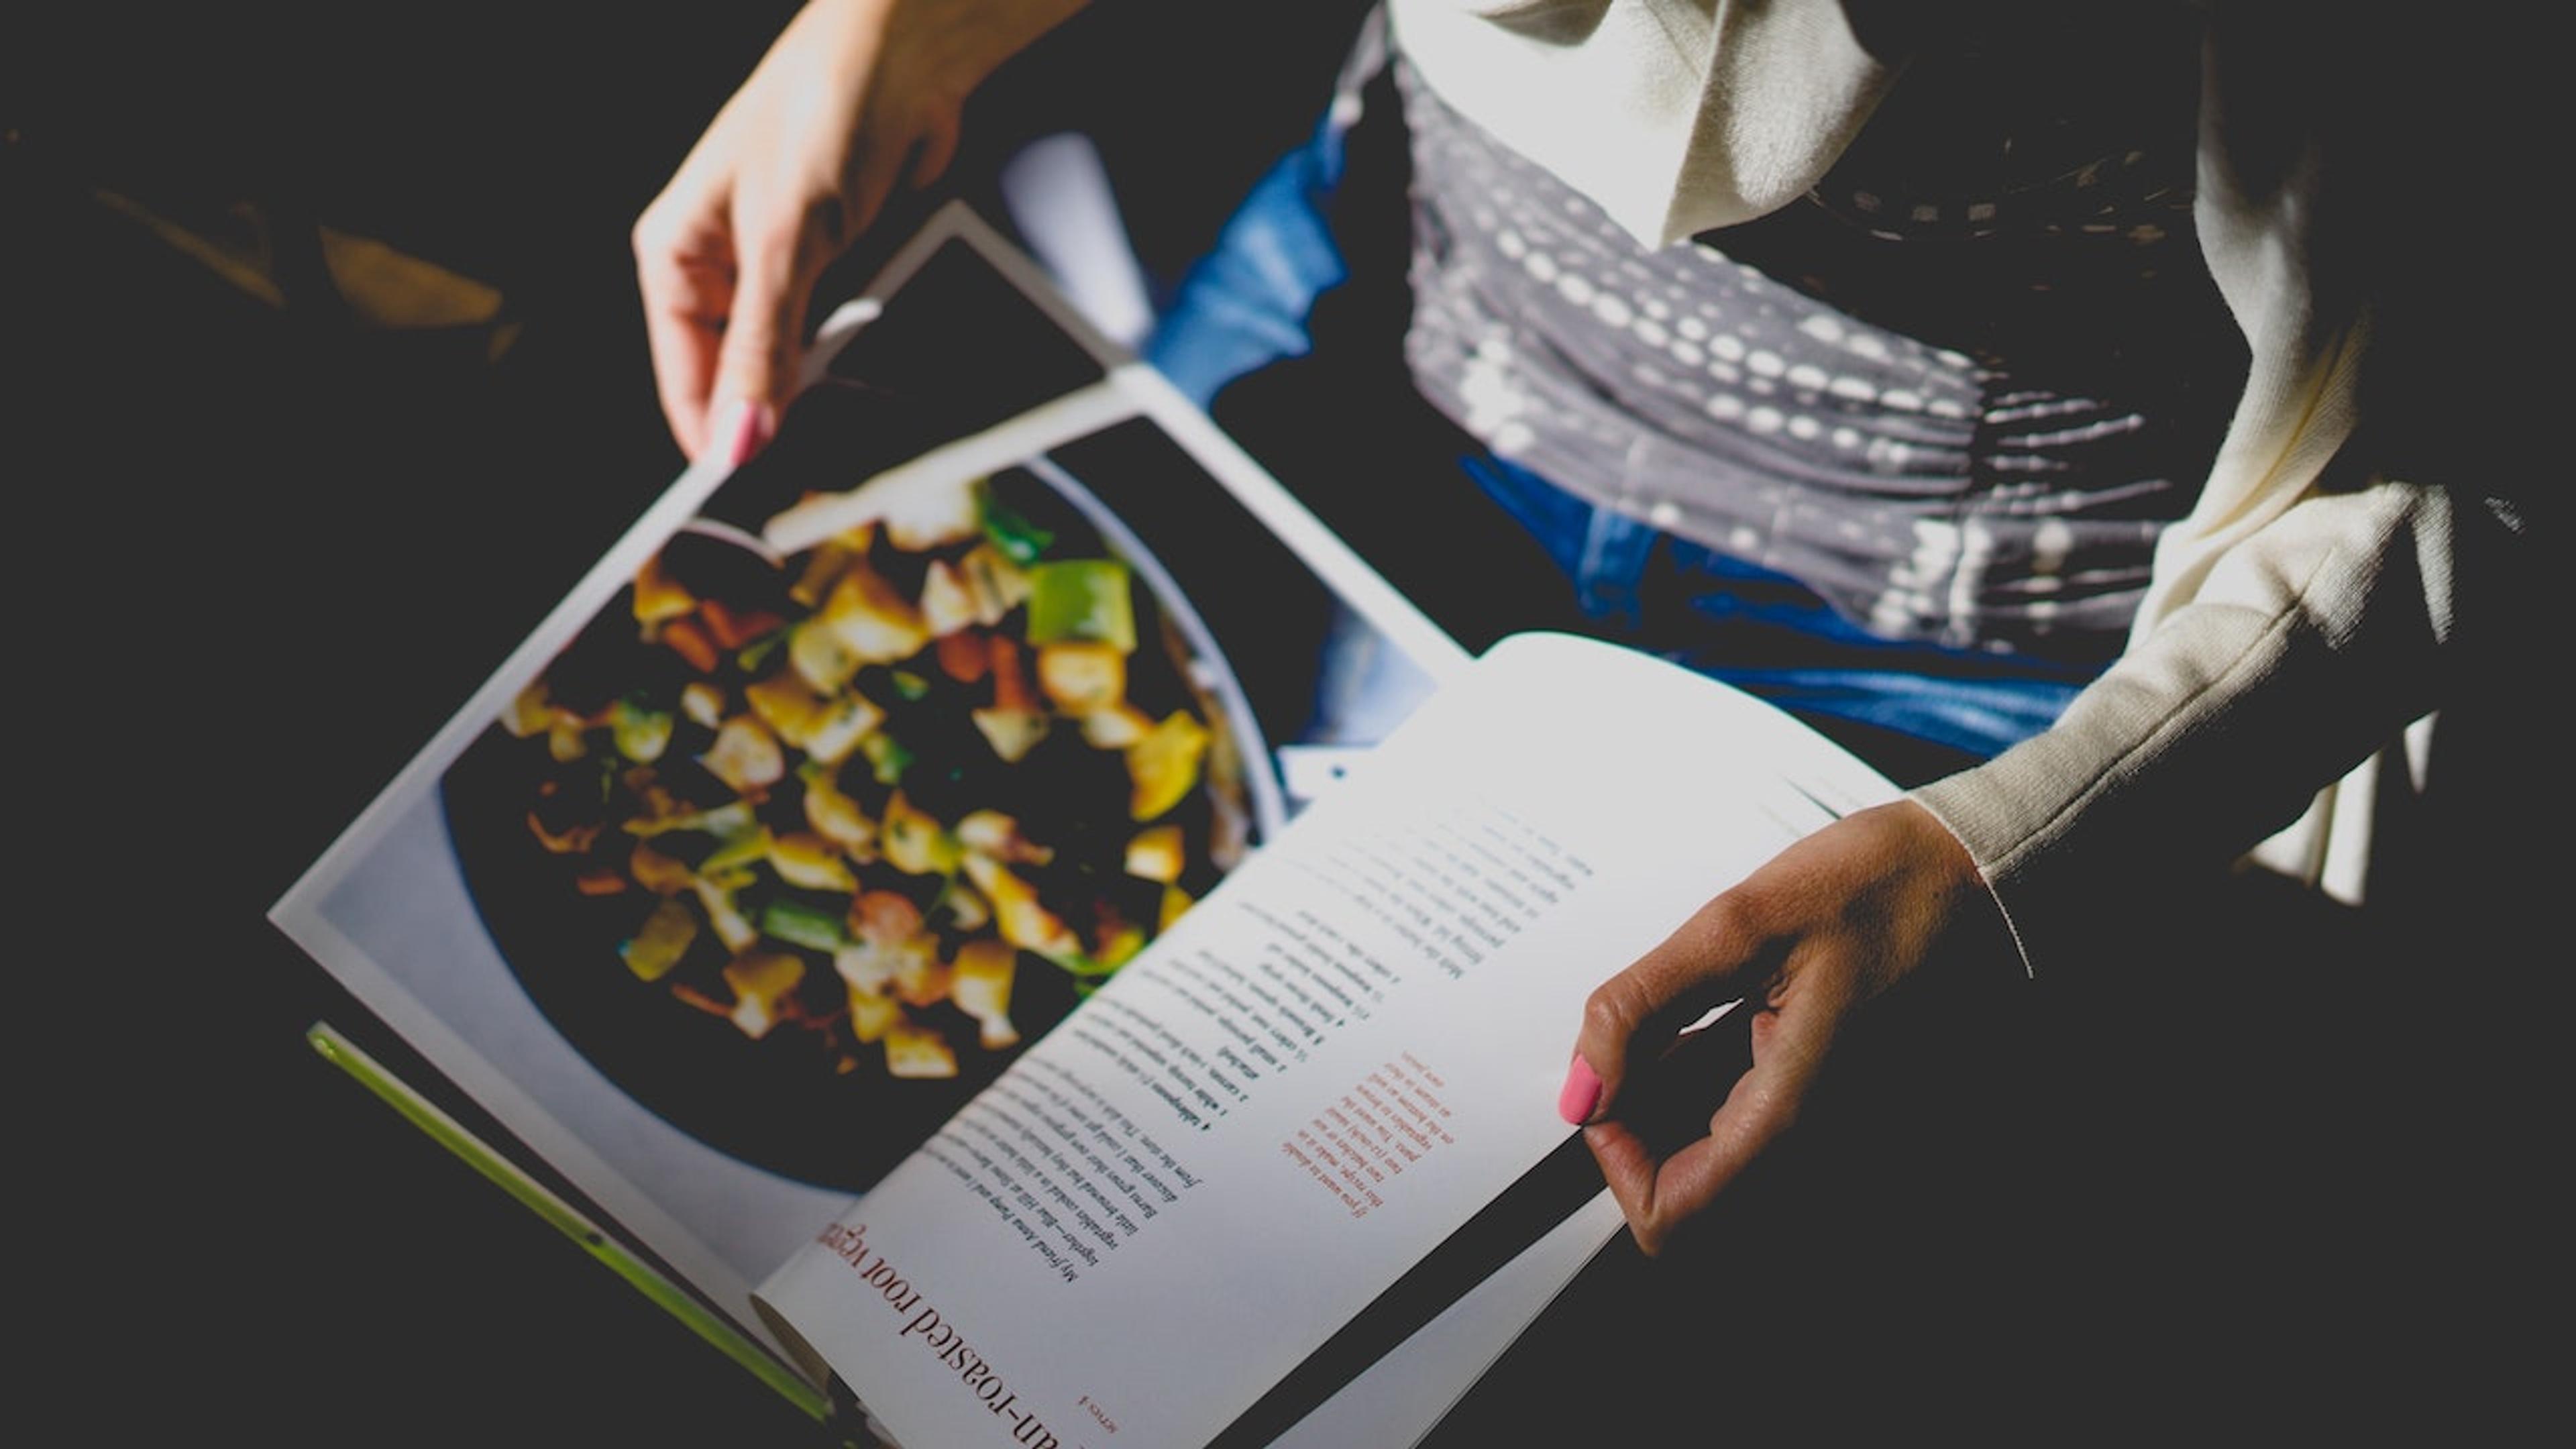 A person holds open a cookbook, looking at a recipe